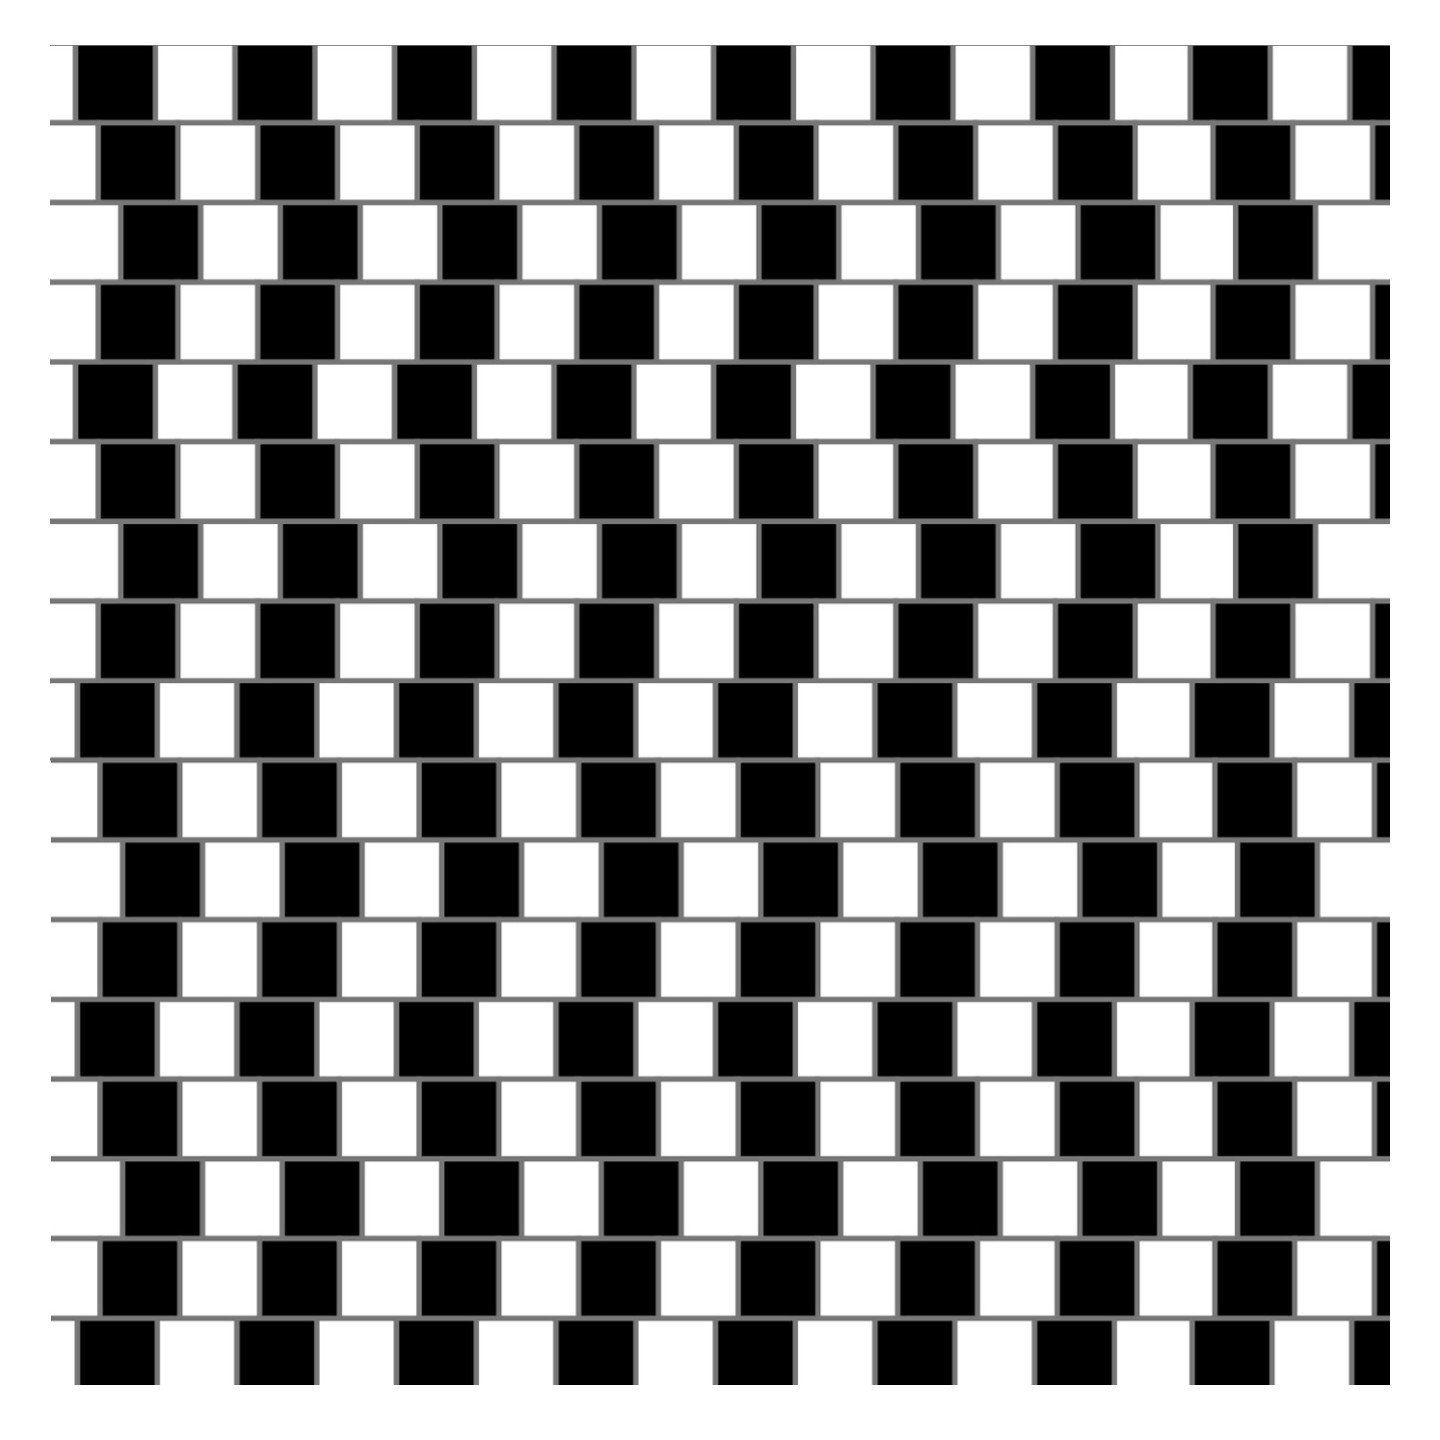 170712_Optical_illusions_explained_feature.jpg